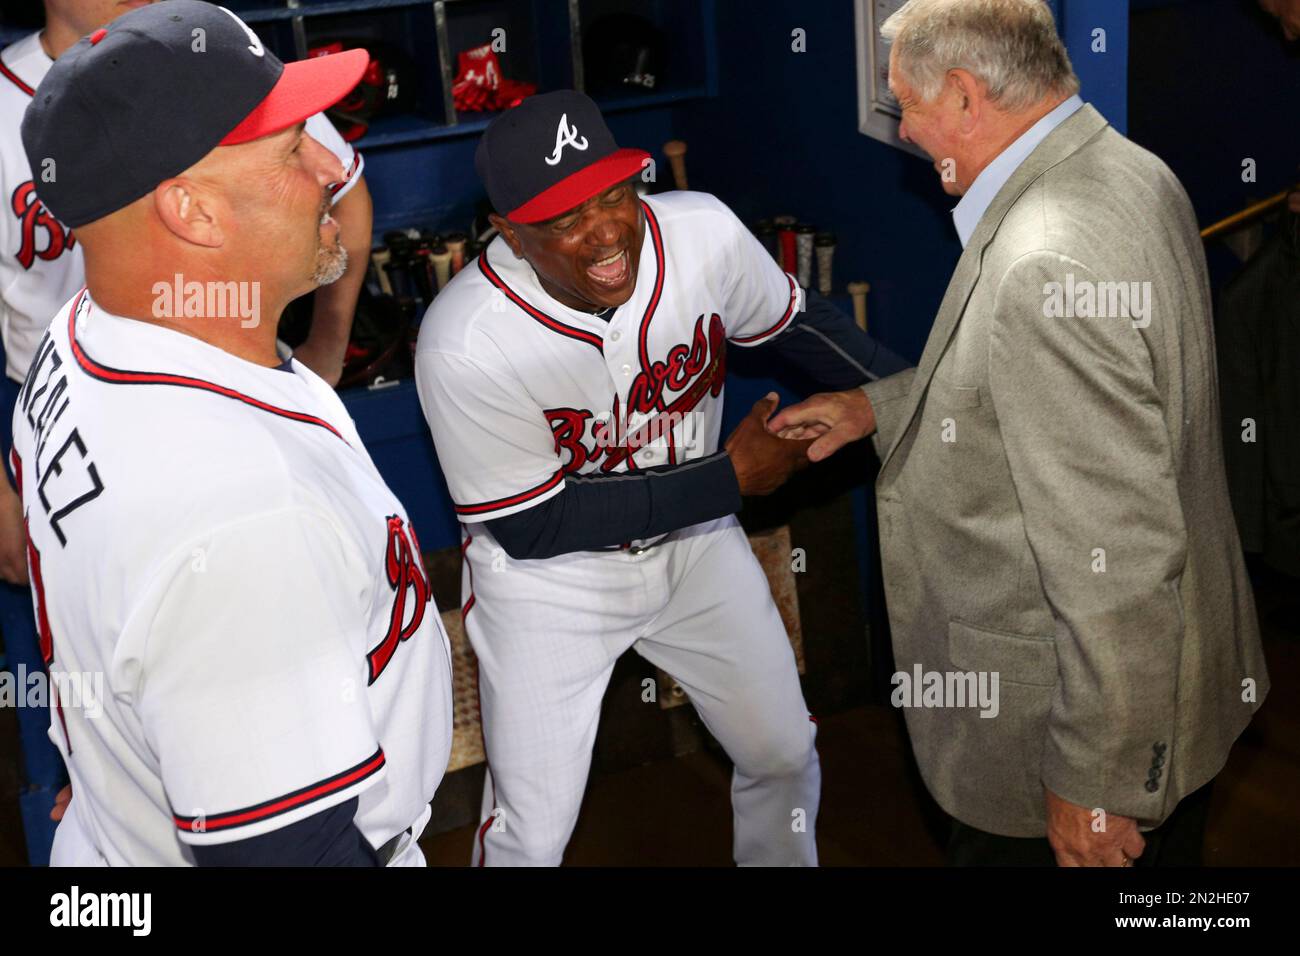 Atlanta Braves' Terry Pendleton, left, has a laugh with former Braves  Manager Bobby Cox, right, in the dugout as Braves Manager Fredi Gonzalez  looks on in the dugout prior to the baseball